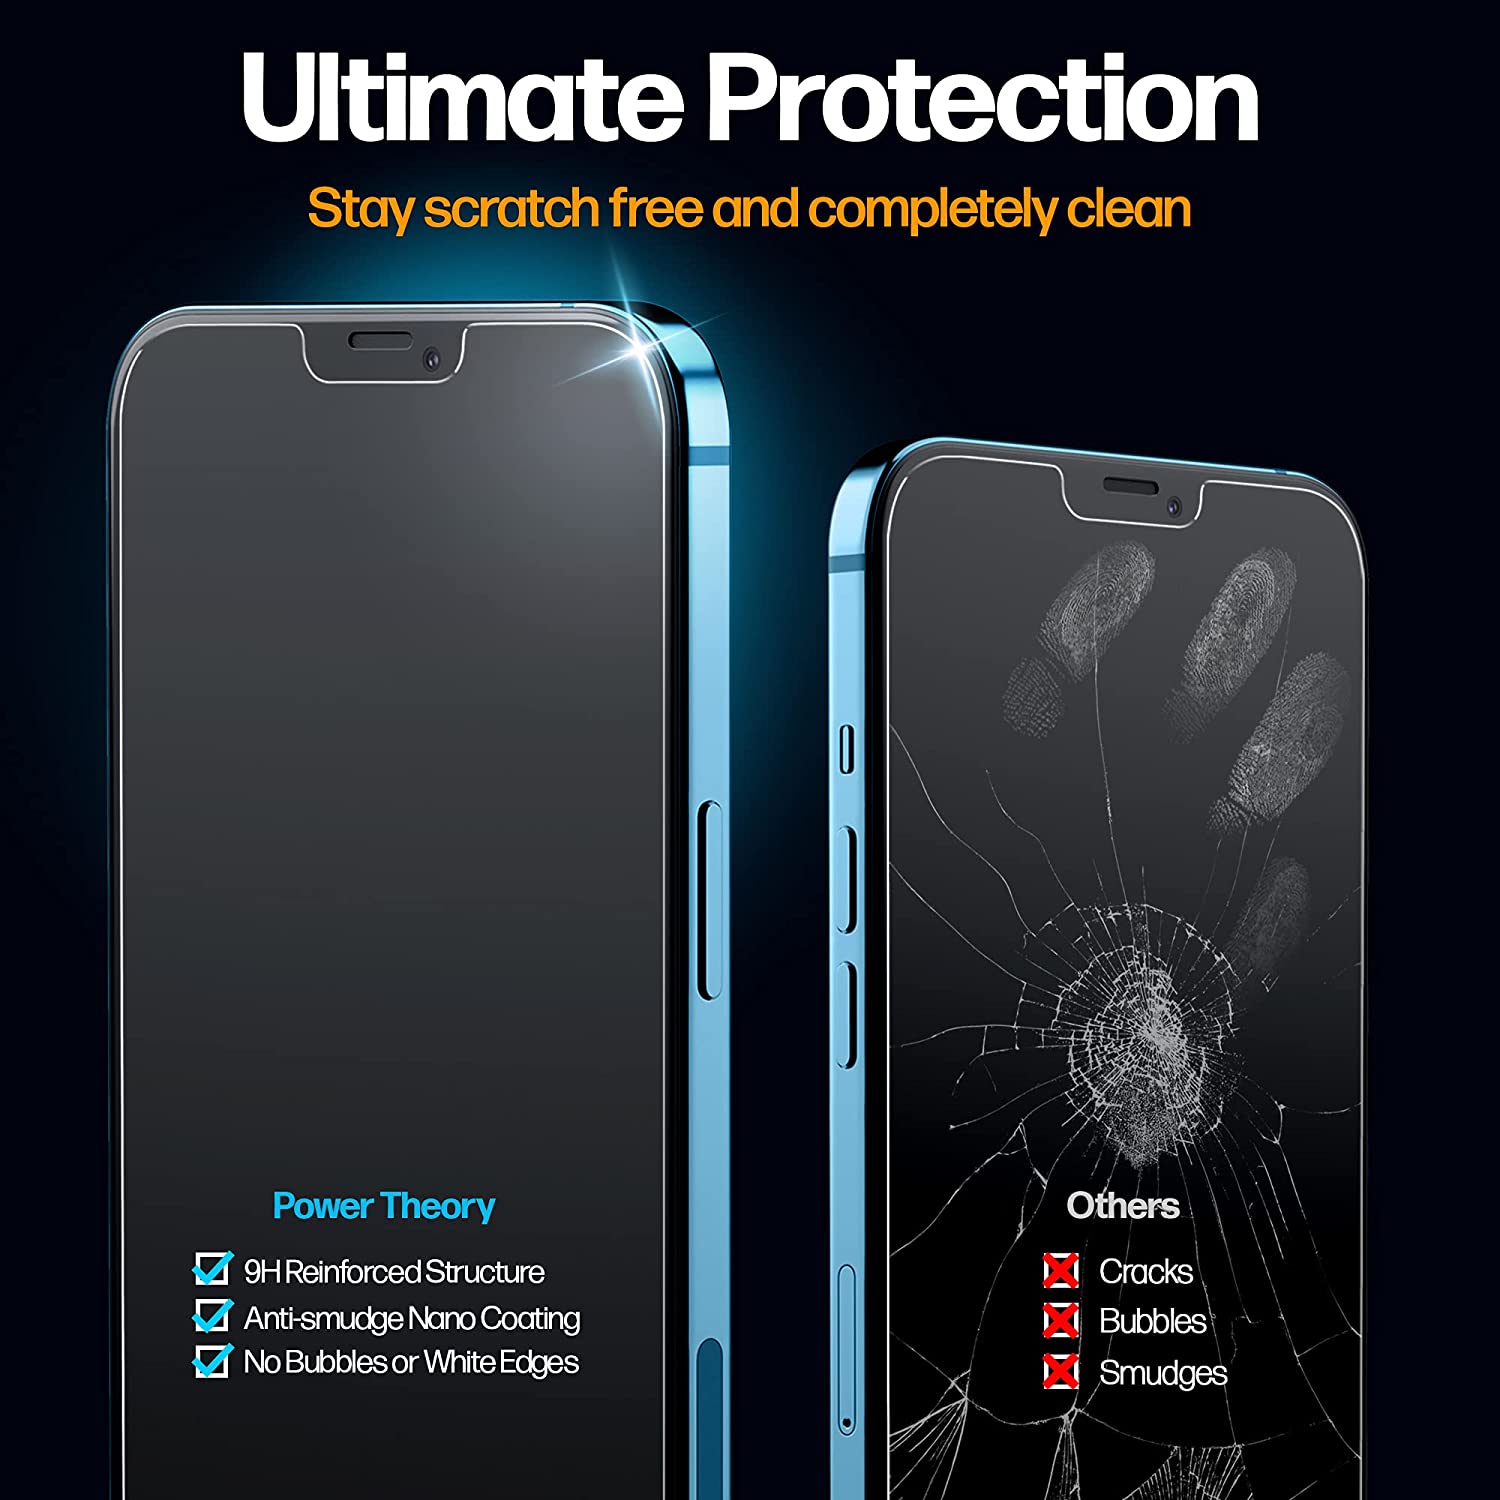 iPhone 13 Mini Tempered Glass Screen Protector [2-Pack]